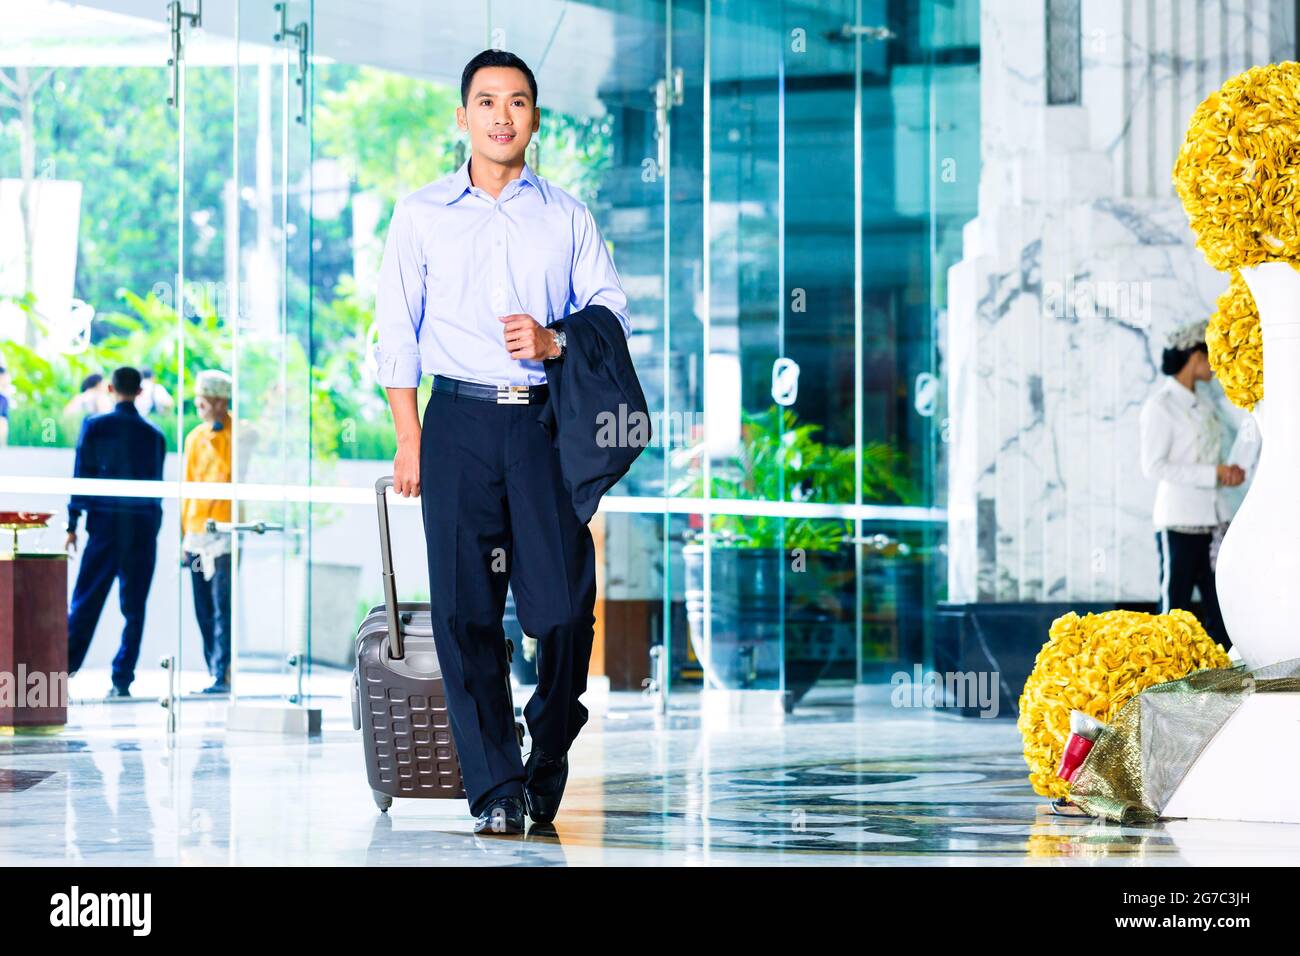 Asian man pulling suitcase in hotel lobby Banque D'Images